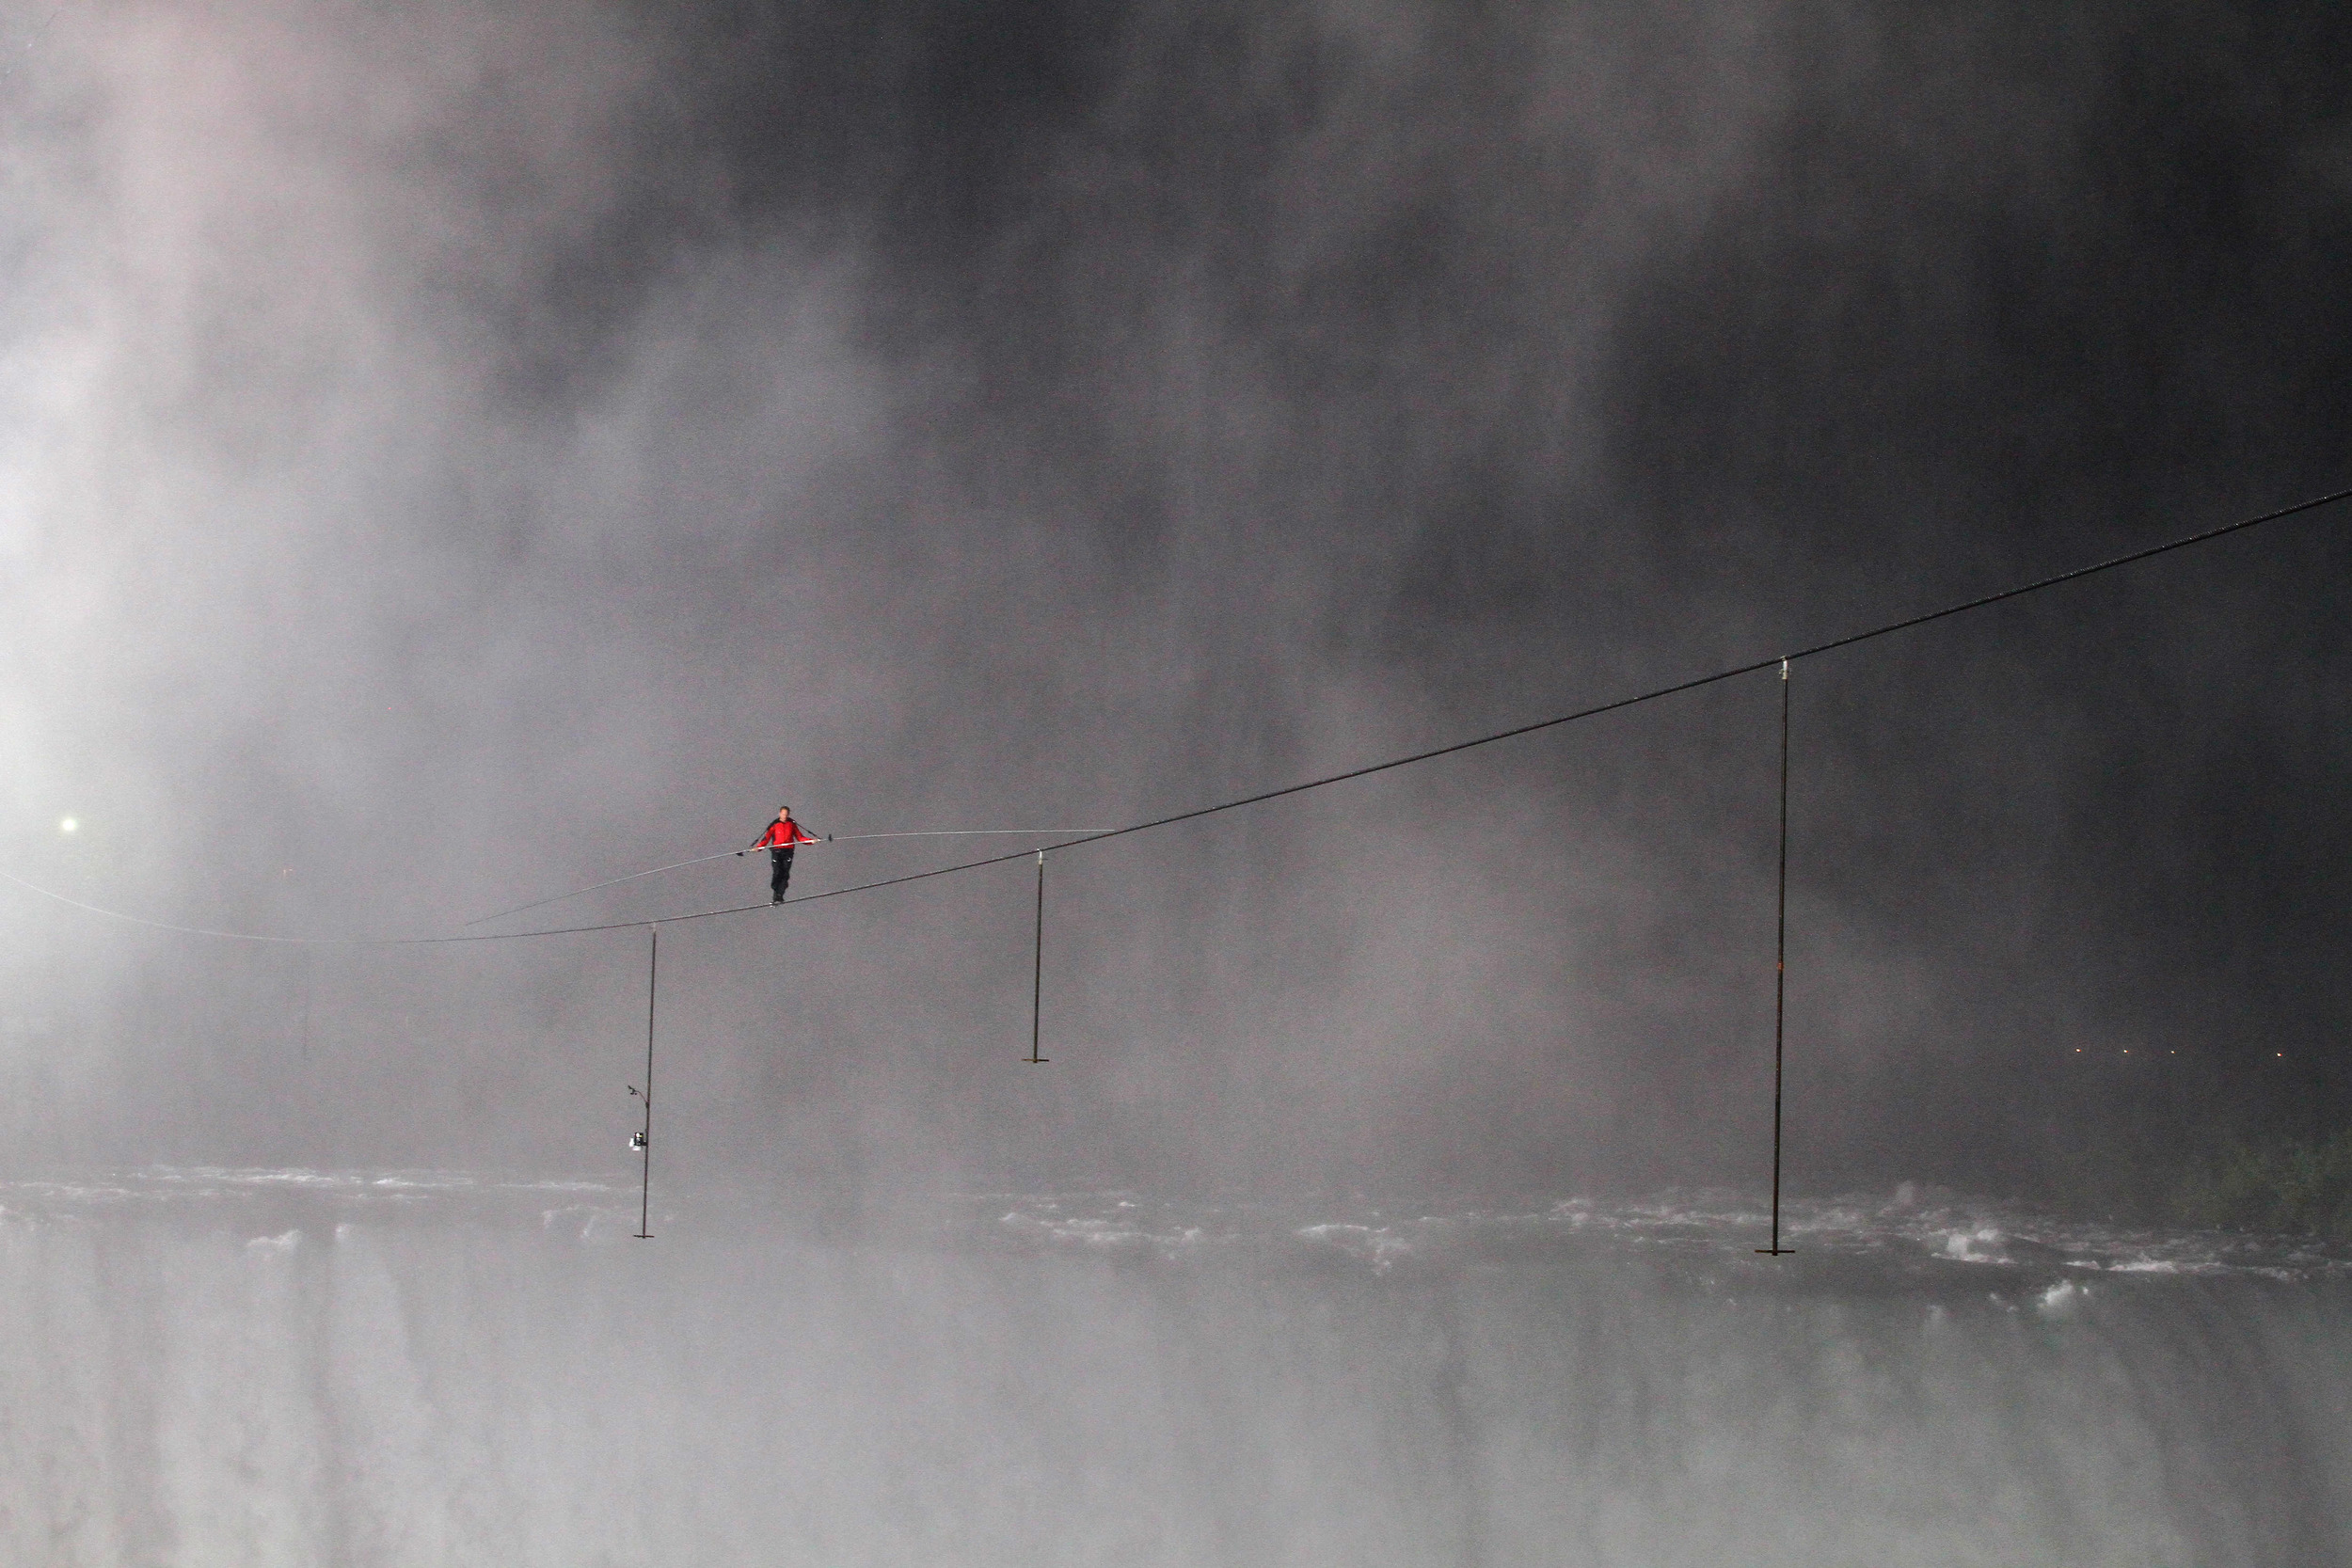 Daredevil tightrope walker becomes first man to cross Niagara Falls on a high wire